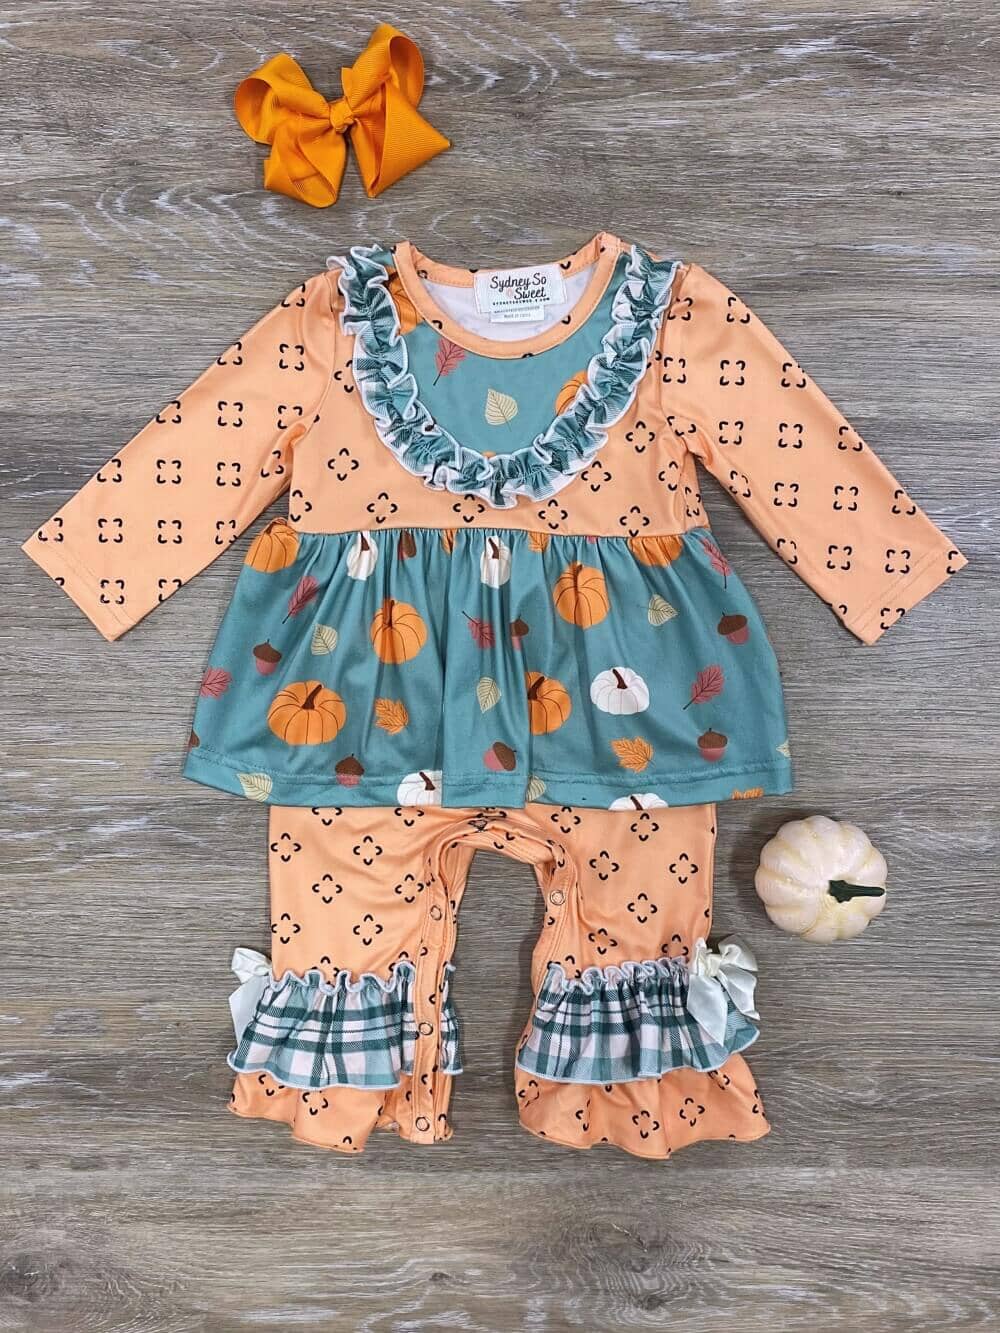 Country Pumpkin Orange & Green Ruffle Baby Outfit - Sydney So Sweet